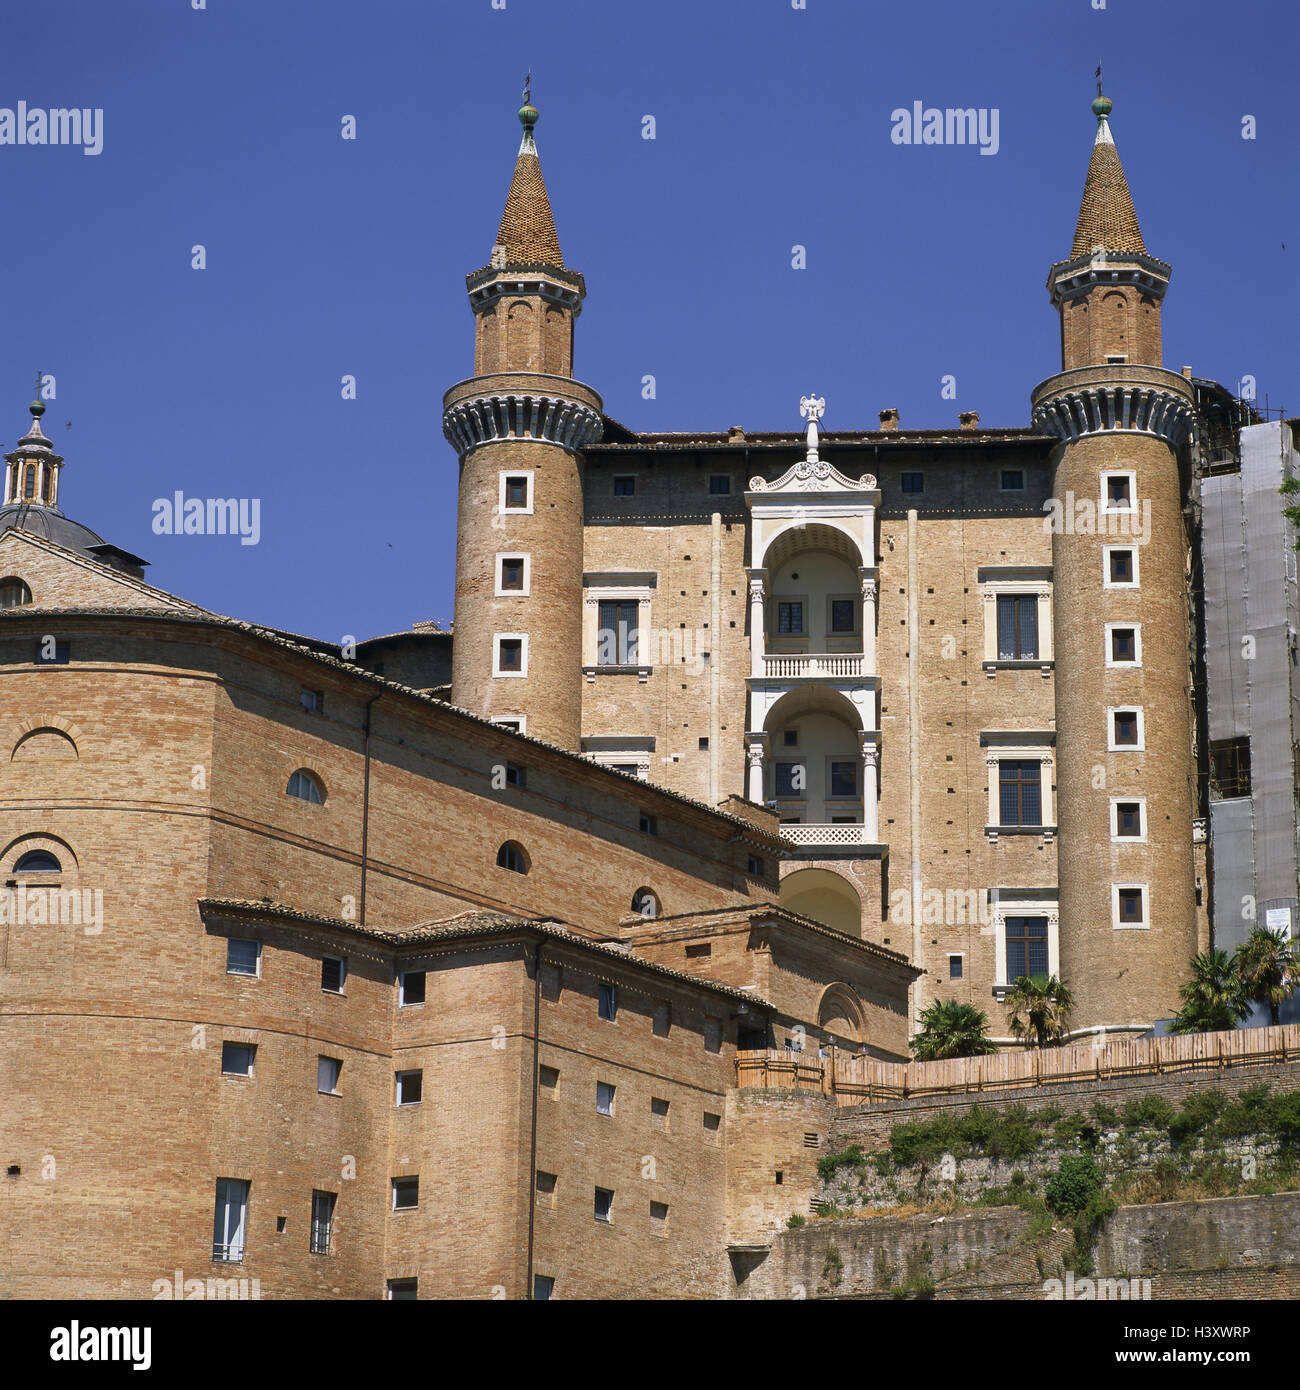 Italy, marks, Urbino, Palazzo Ducale, Piazza Duca Federico, palace, structure, architecture, place of interest, UNESCO-world cultural heritage Stock Photo